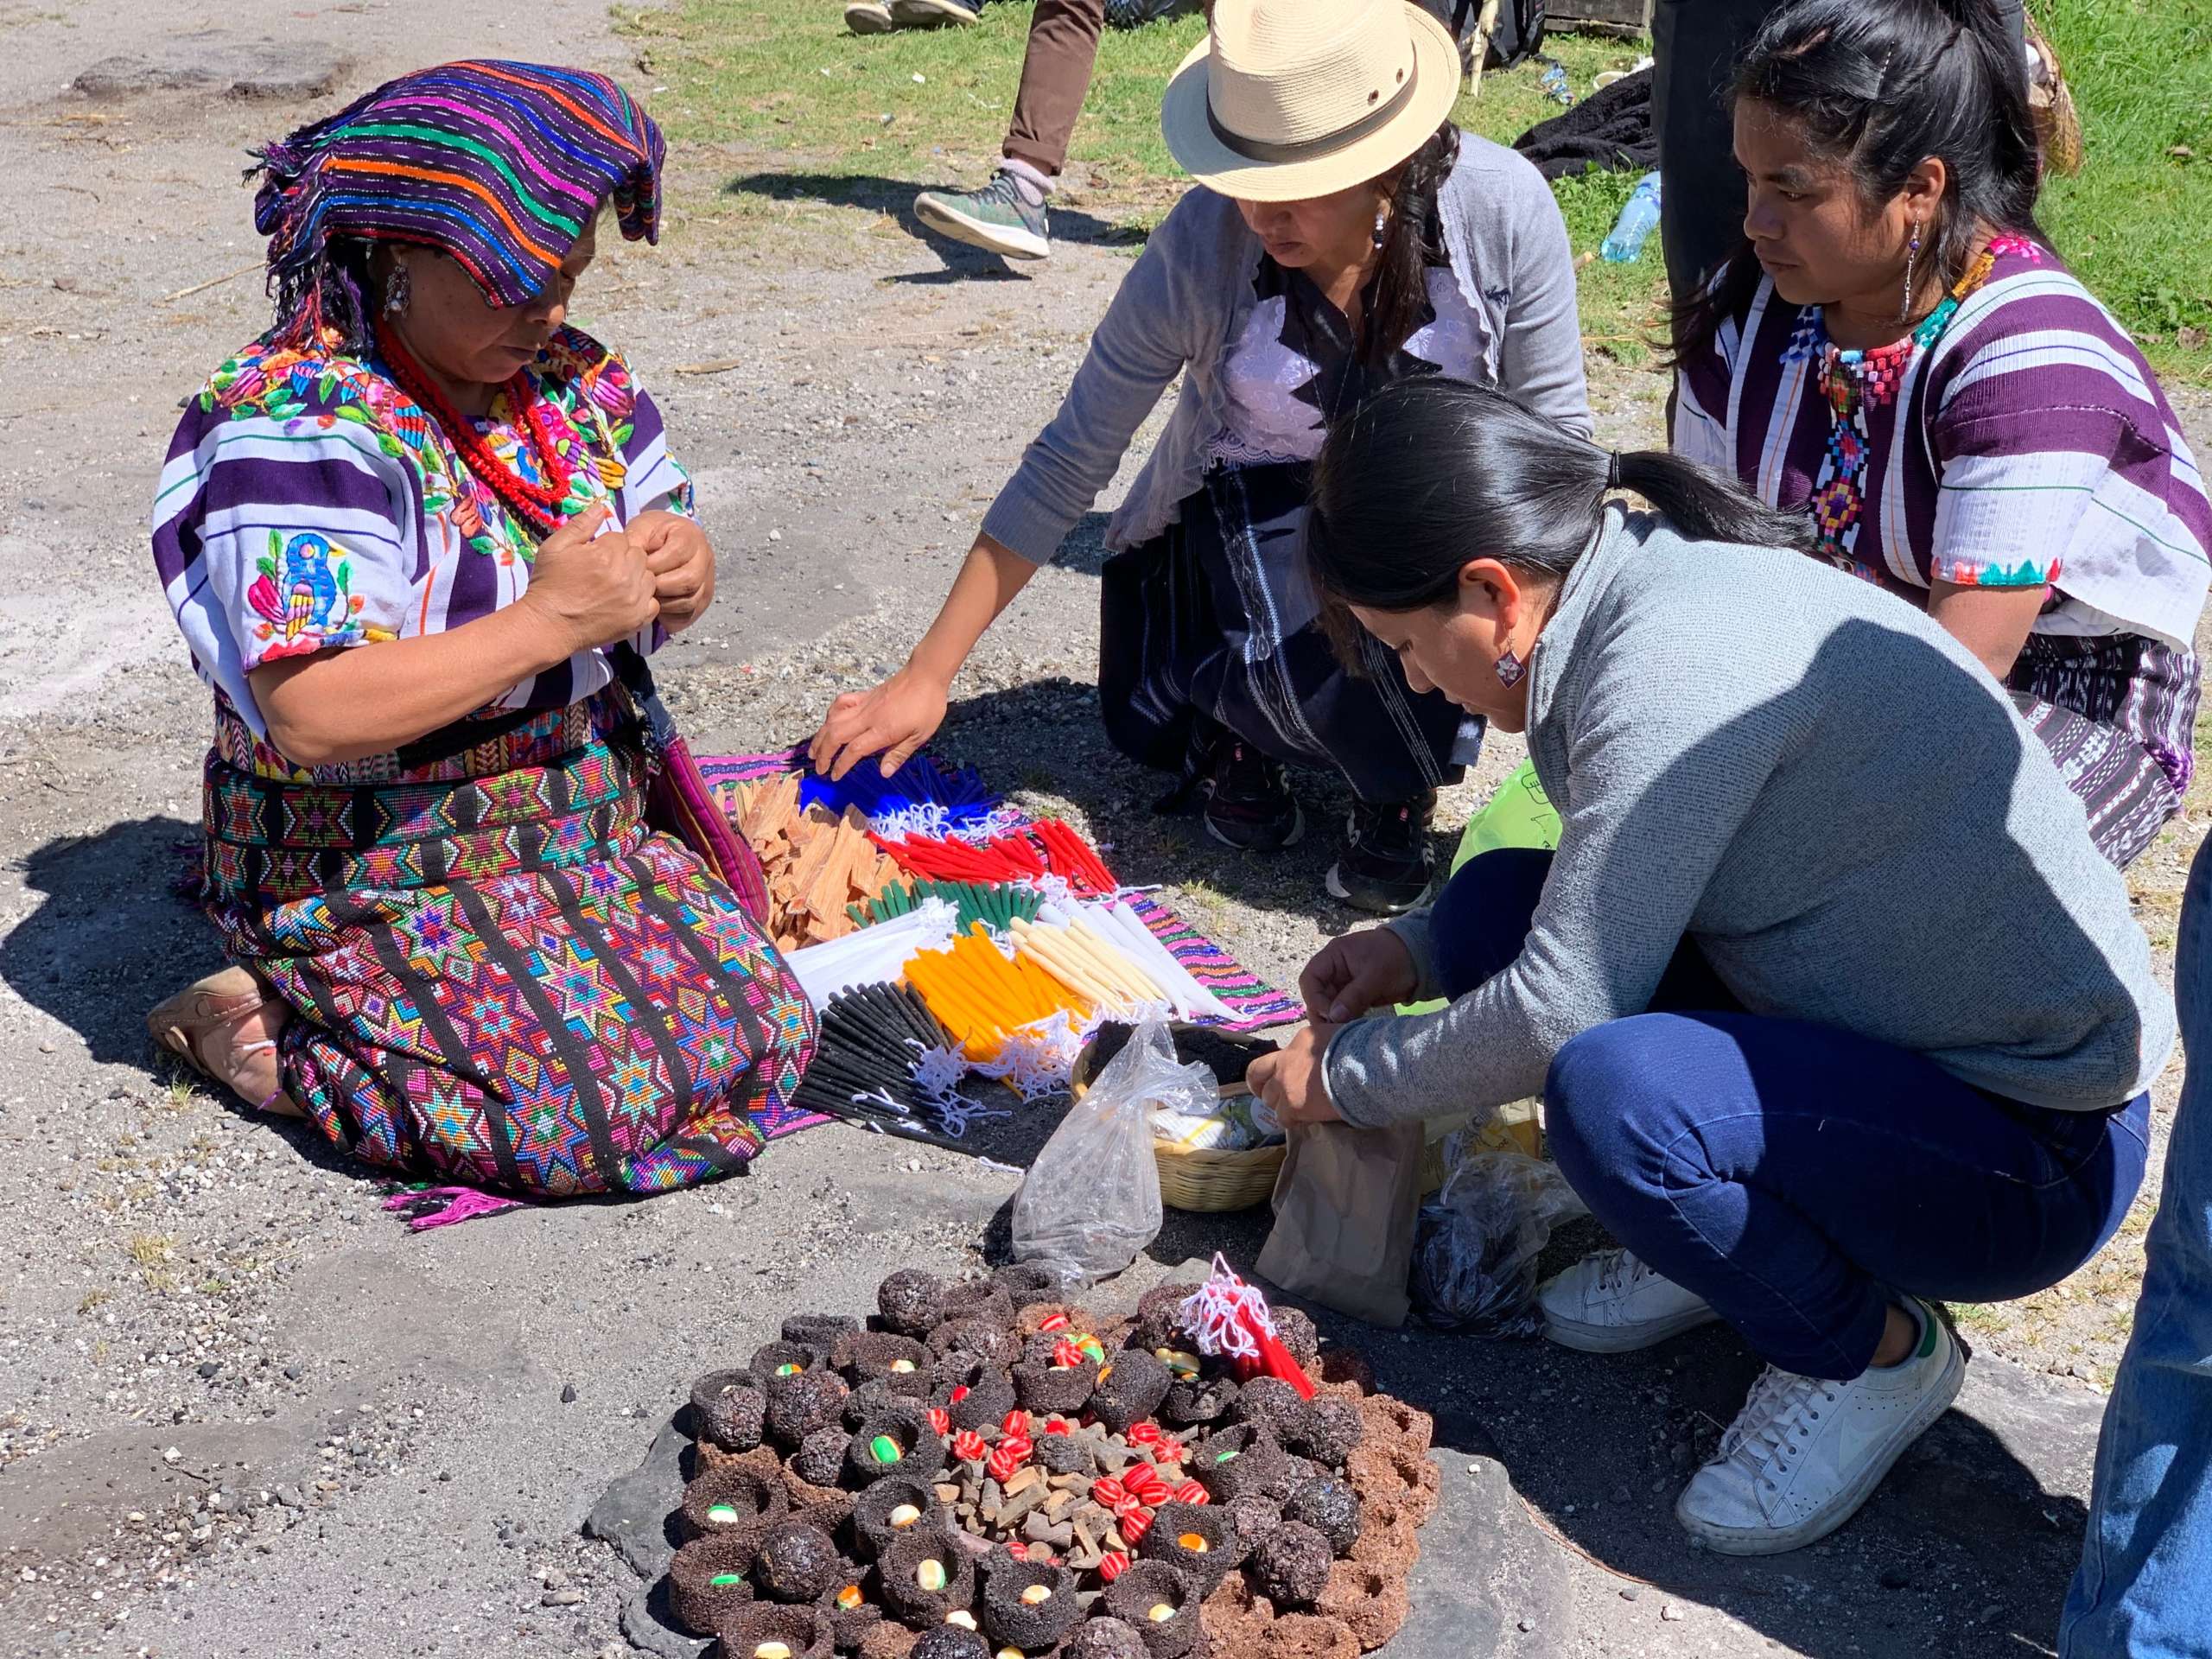  - Preparing the ceremonial offering at the Chikabal Lagoon, Guatemala. (Photo Credit: Nicola Wagenberg, The Cultural Conservancy)